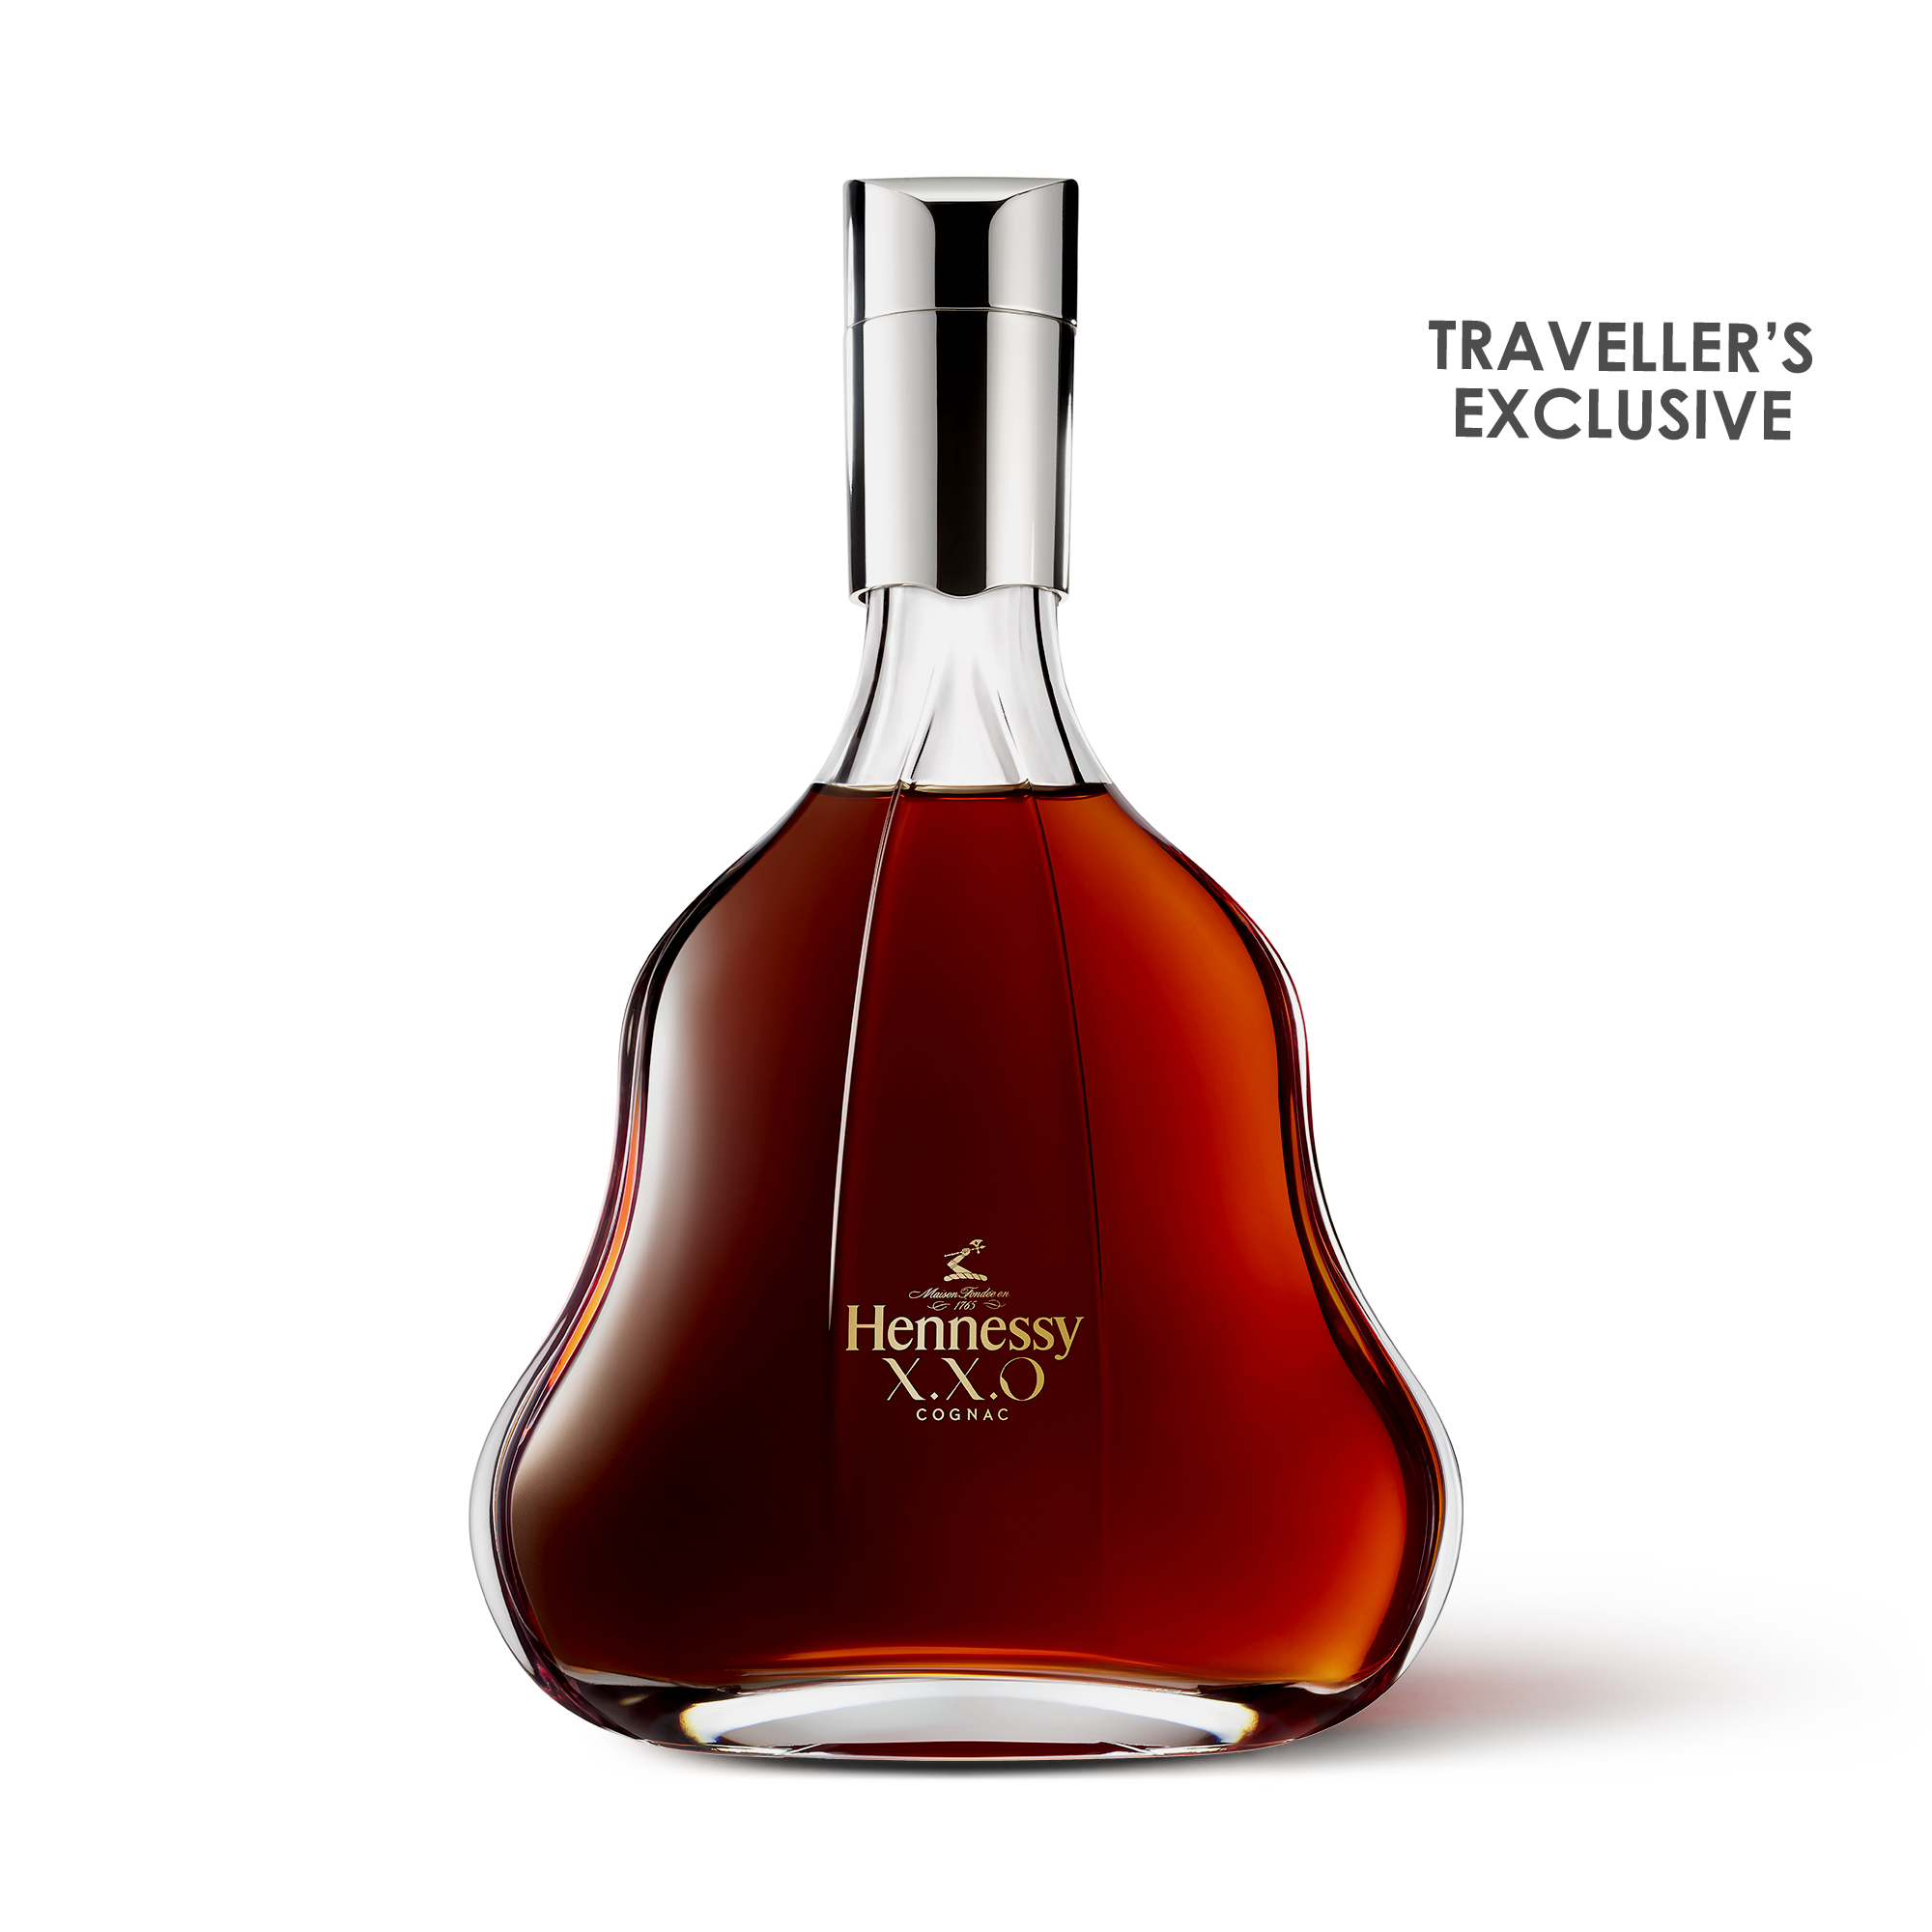 How to drink cognac Hennessy Richard